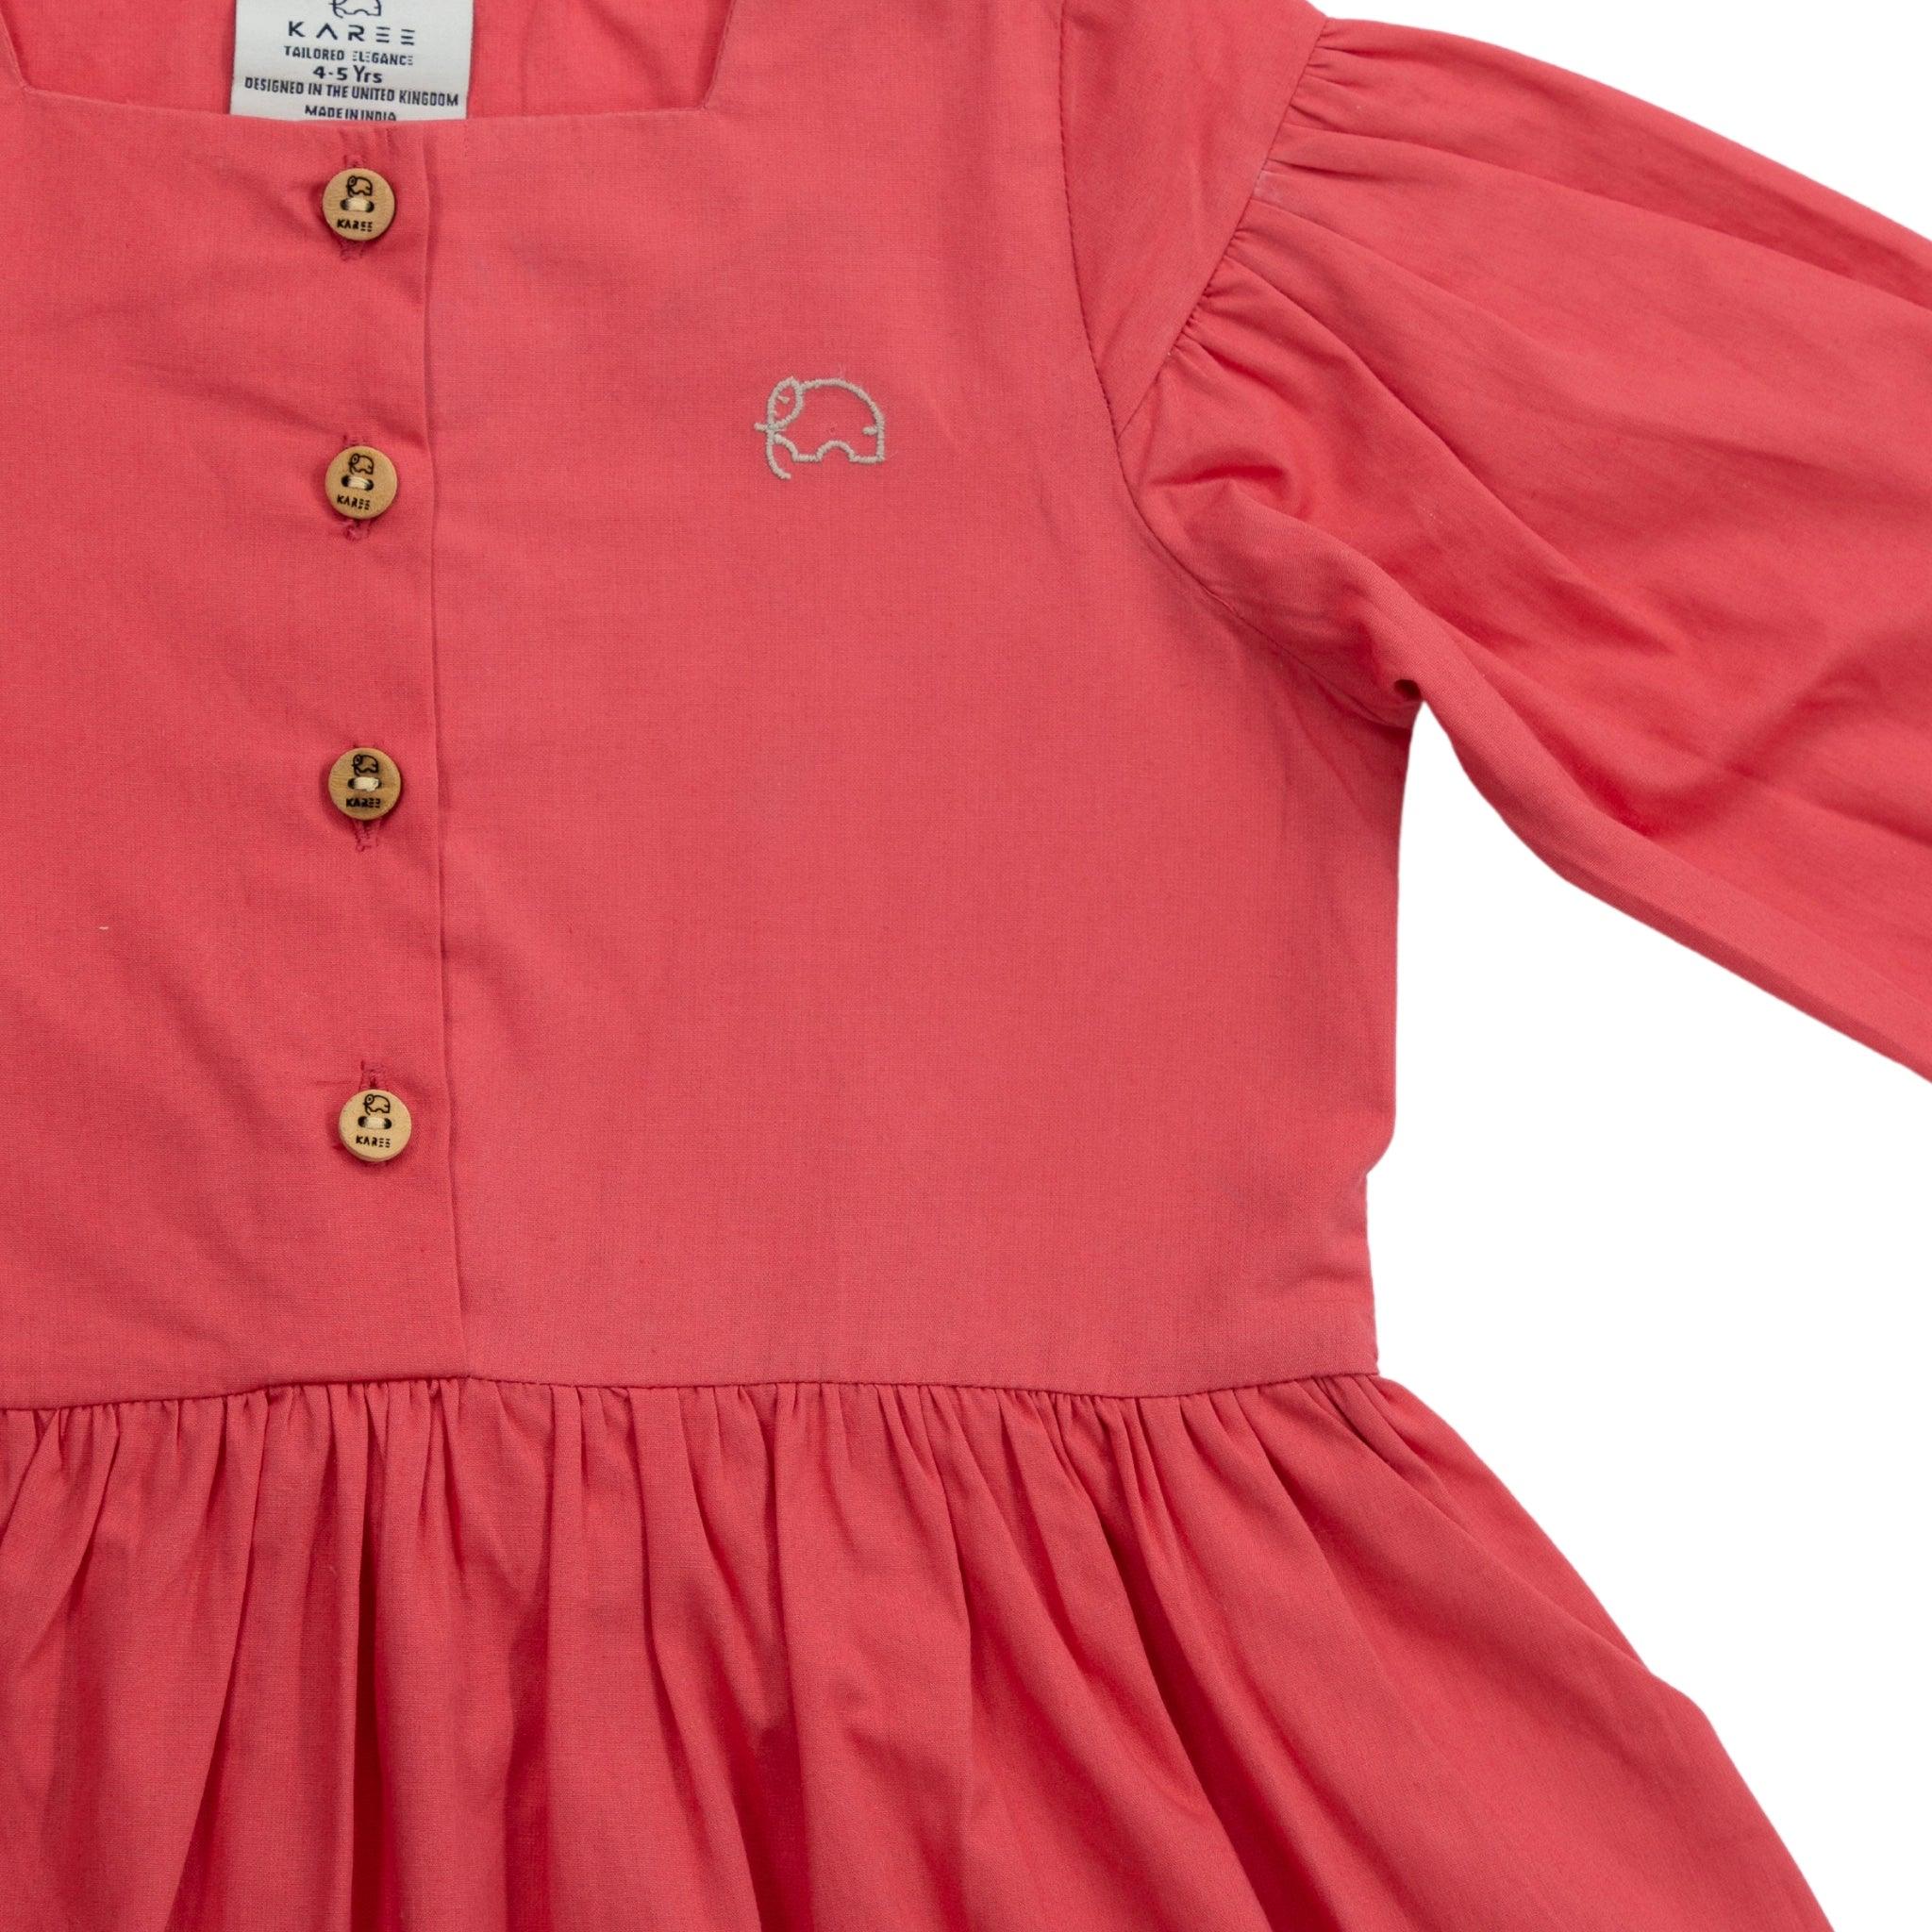 Red Long Puff Sleeve Cotton Dress for toddlers featuring long puff sleeves, wooden buttons, and a small elephant embroidery on the chest by Karee.